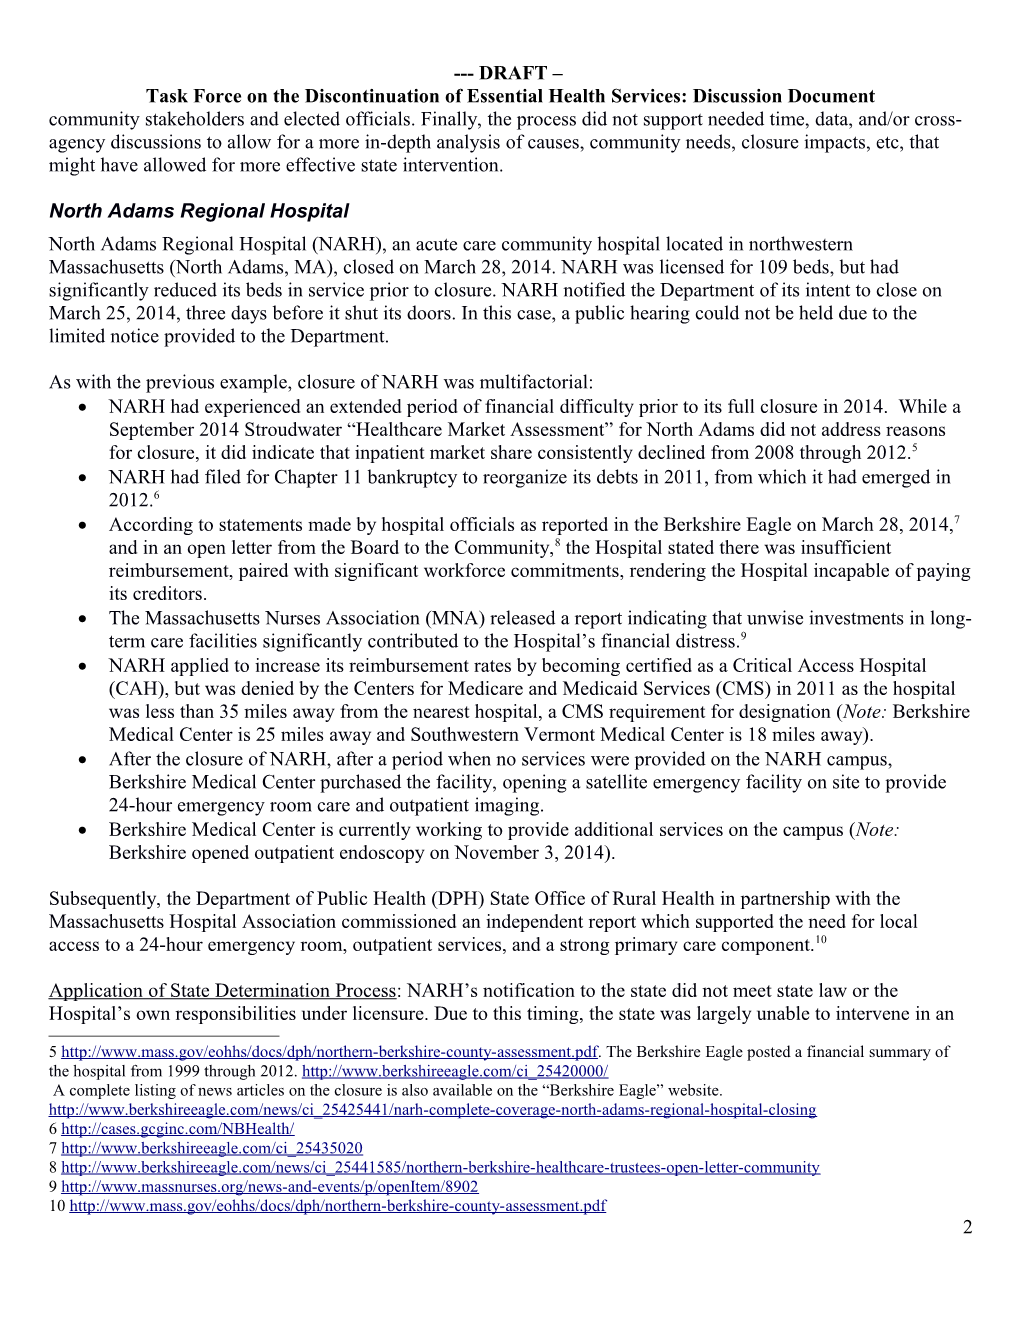 Task Force on the Discontinuation of Essential Health Services: Discussion Document